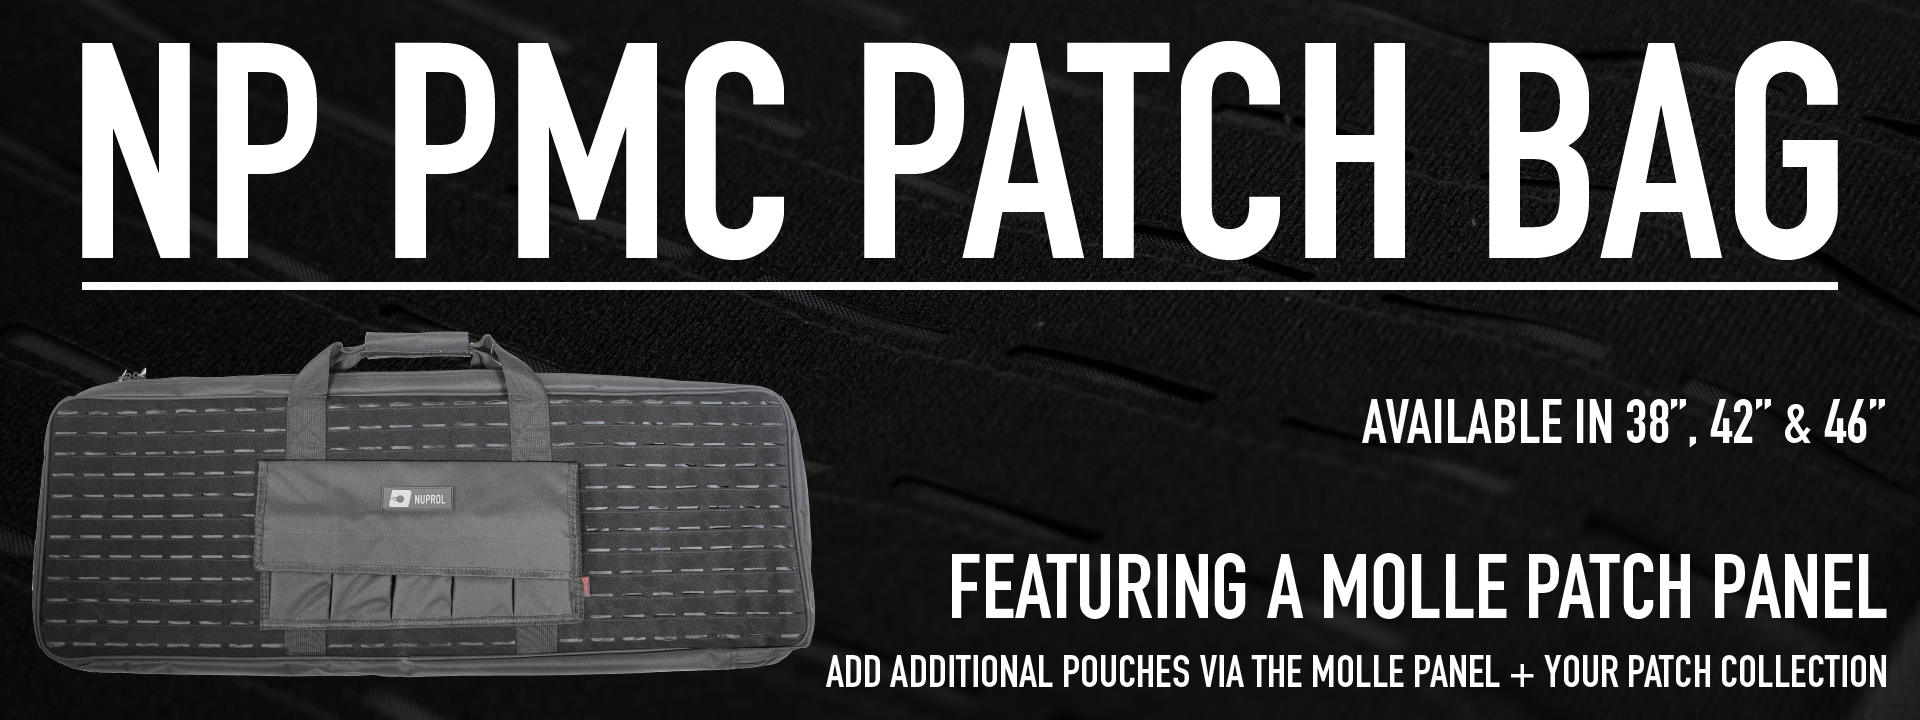 The NEW NP PMC Essential Soft Rifle PATCH Bag